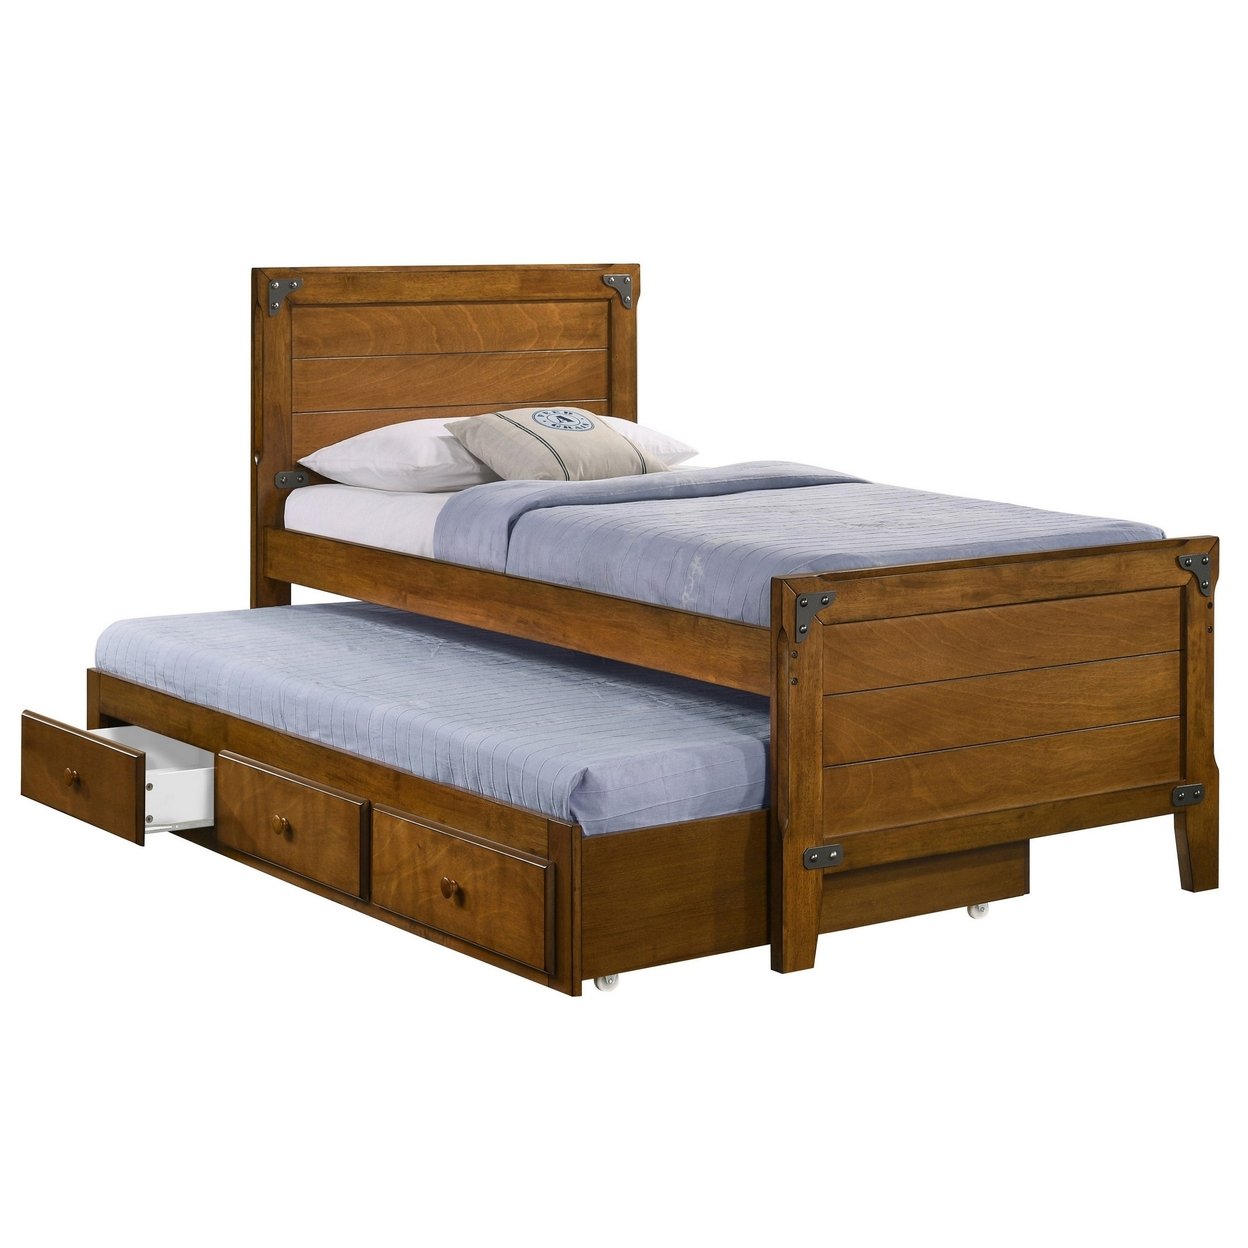 Twin Captains Bed With 3 Drawer Trundle, Plank Headboard, Honey Brown Wood- Saltoro Sherpi